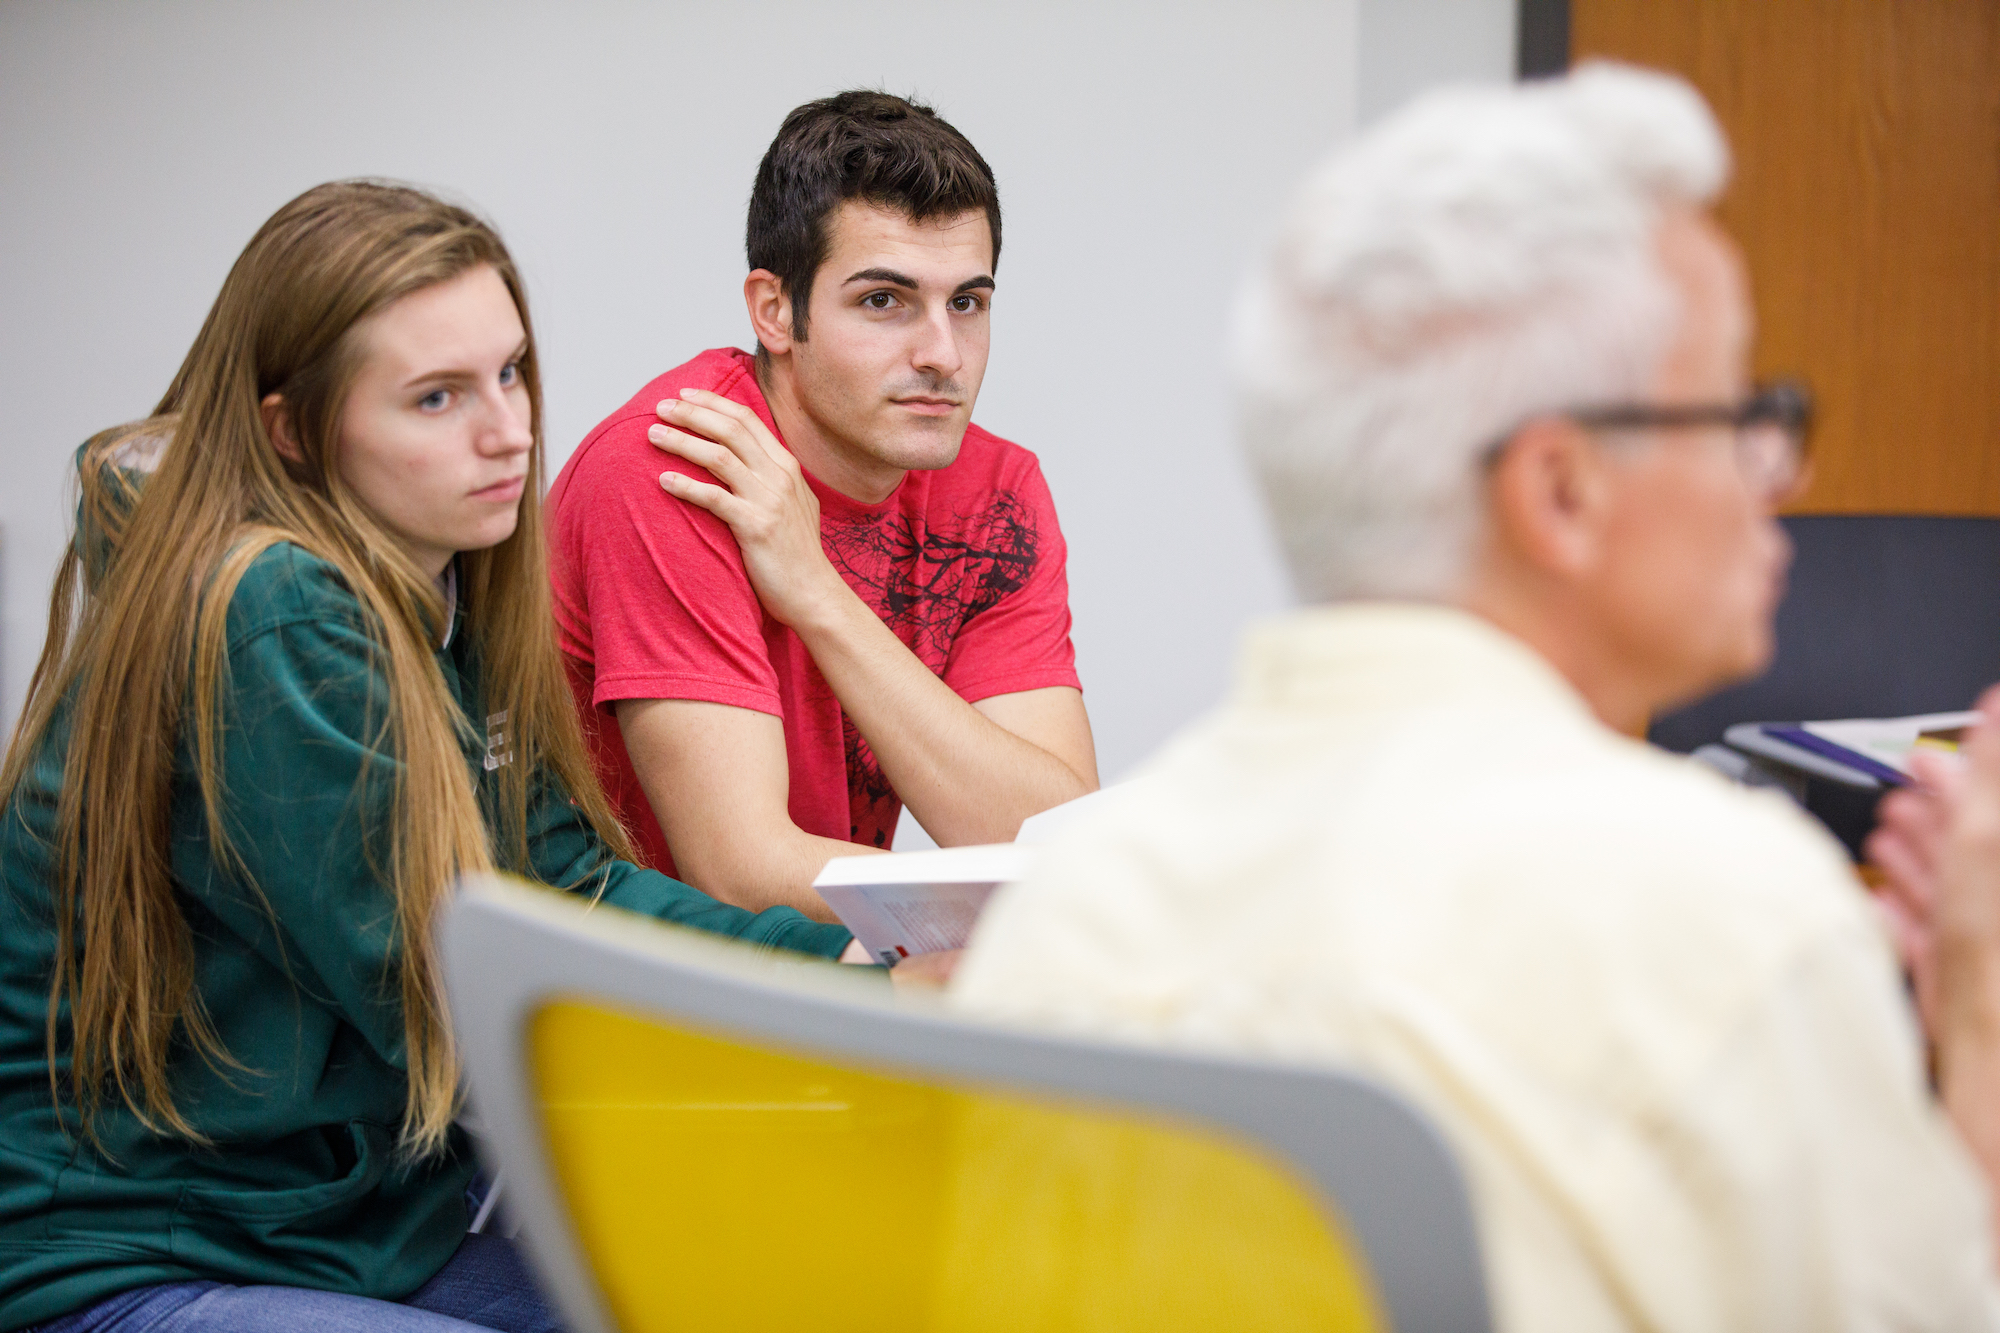 Students participating in a classroom discussion.